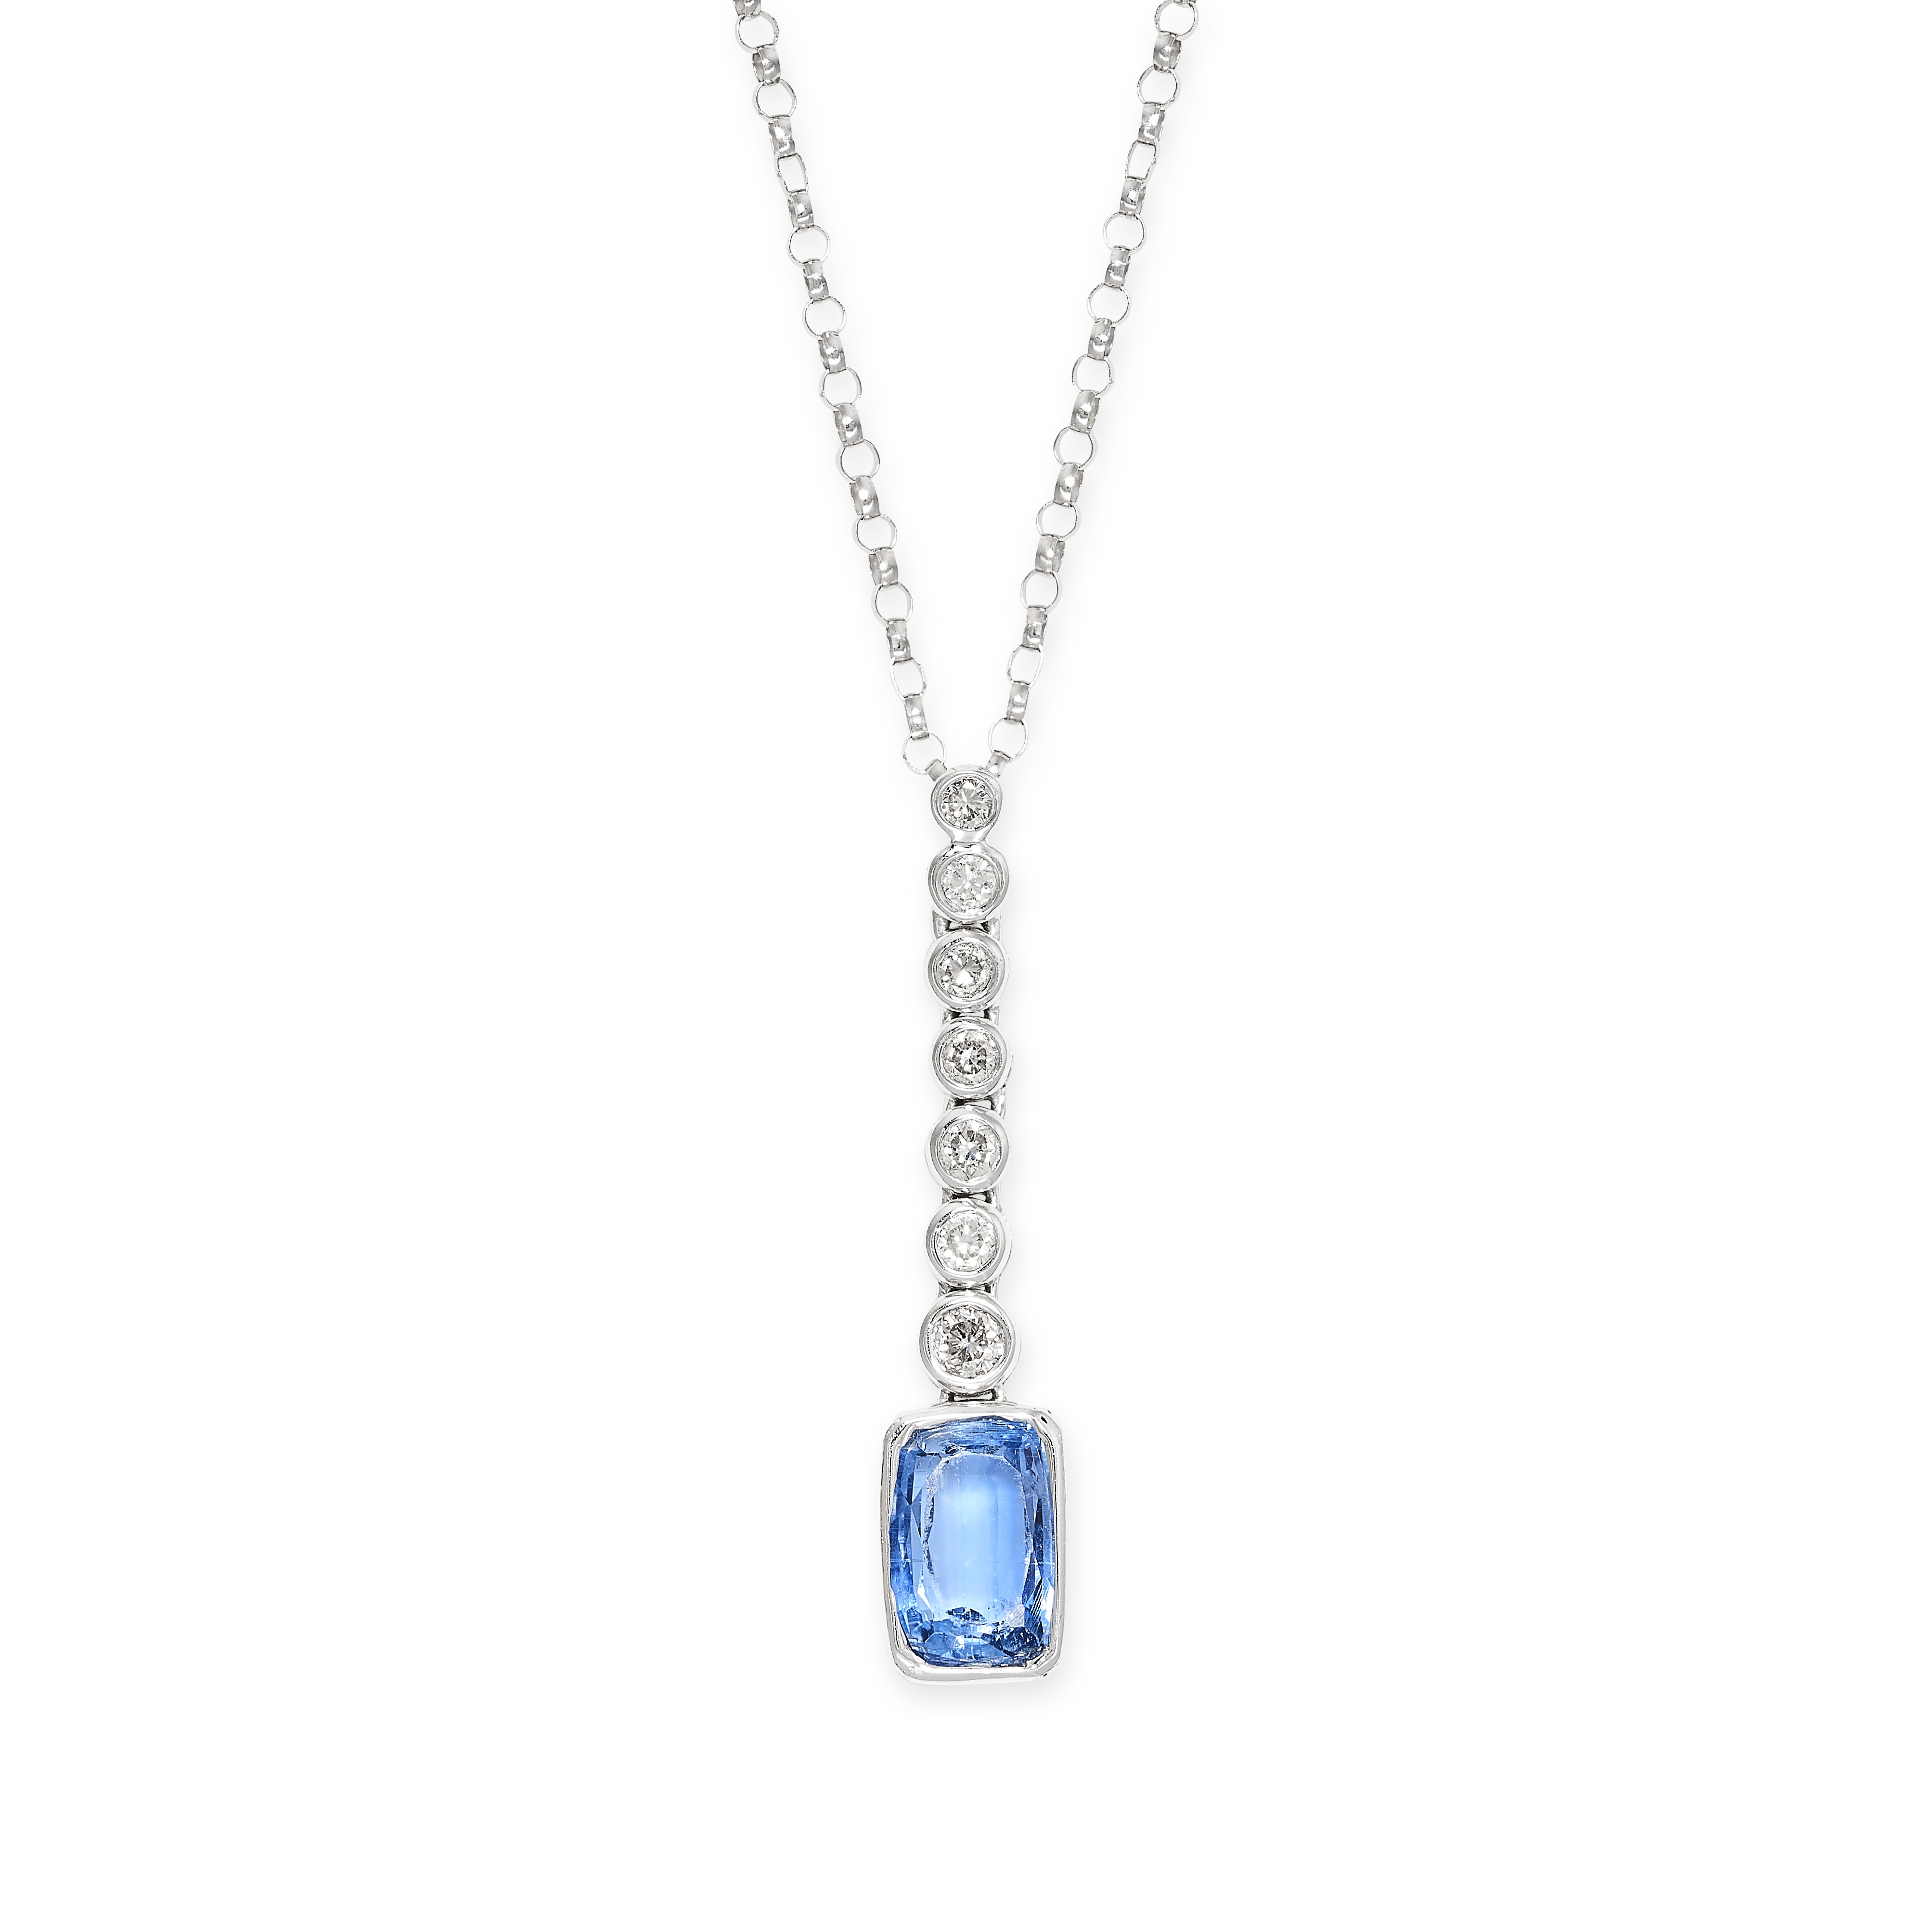 A SAPPHIRE AND DIAMOND NECKLACE in 18ct and 9ct white gold, the pendant set with a row of round